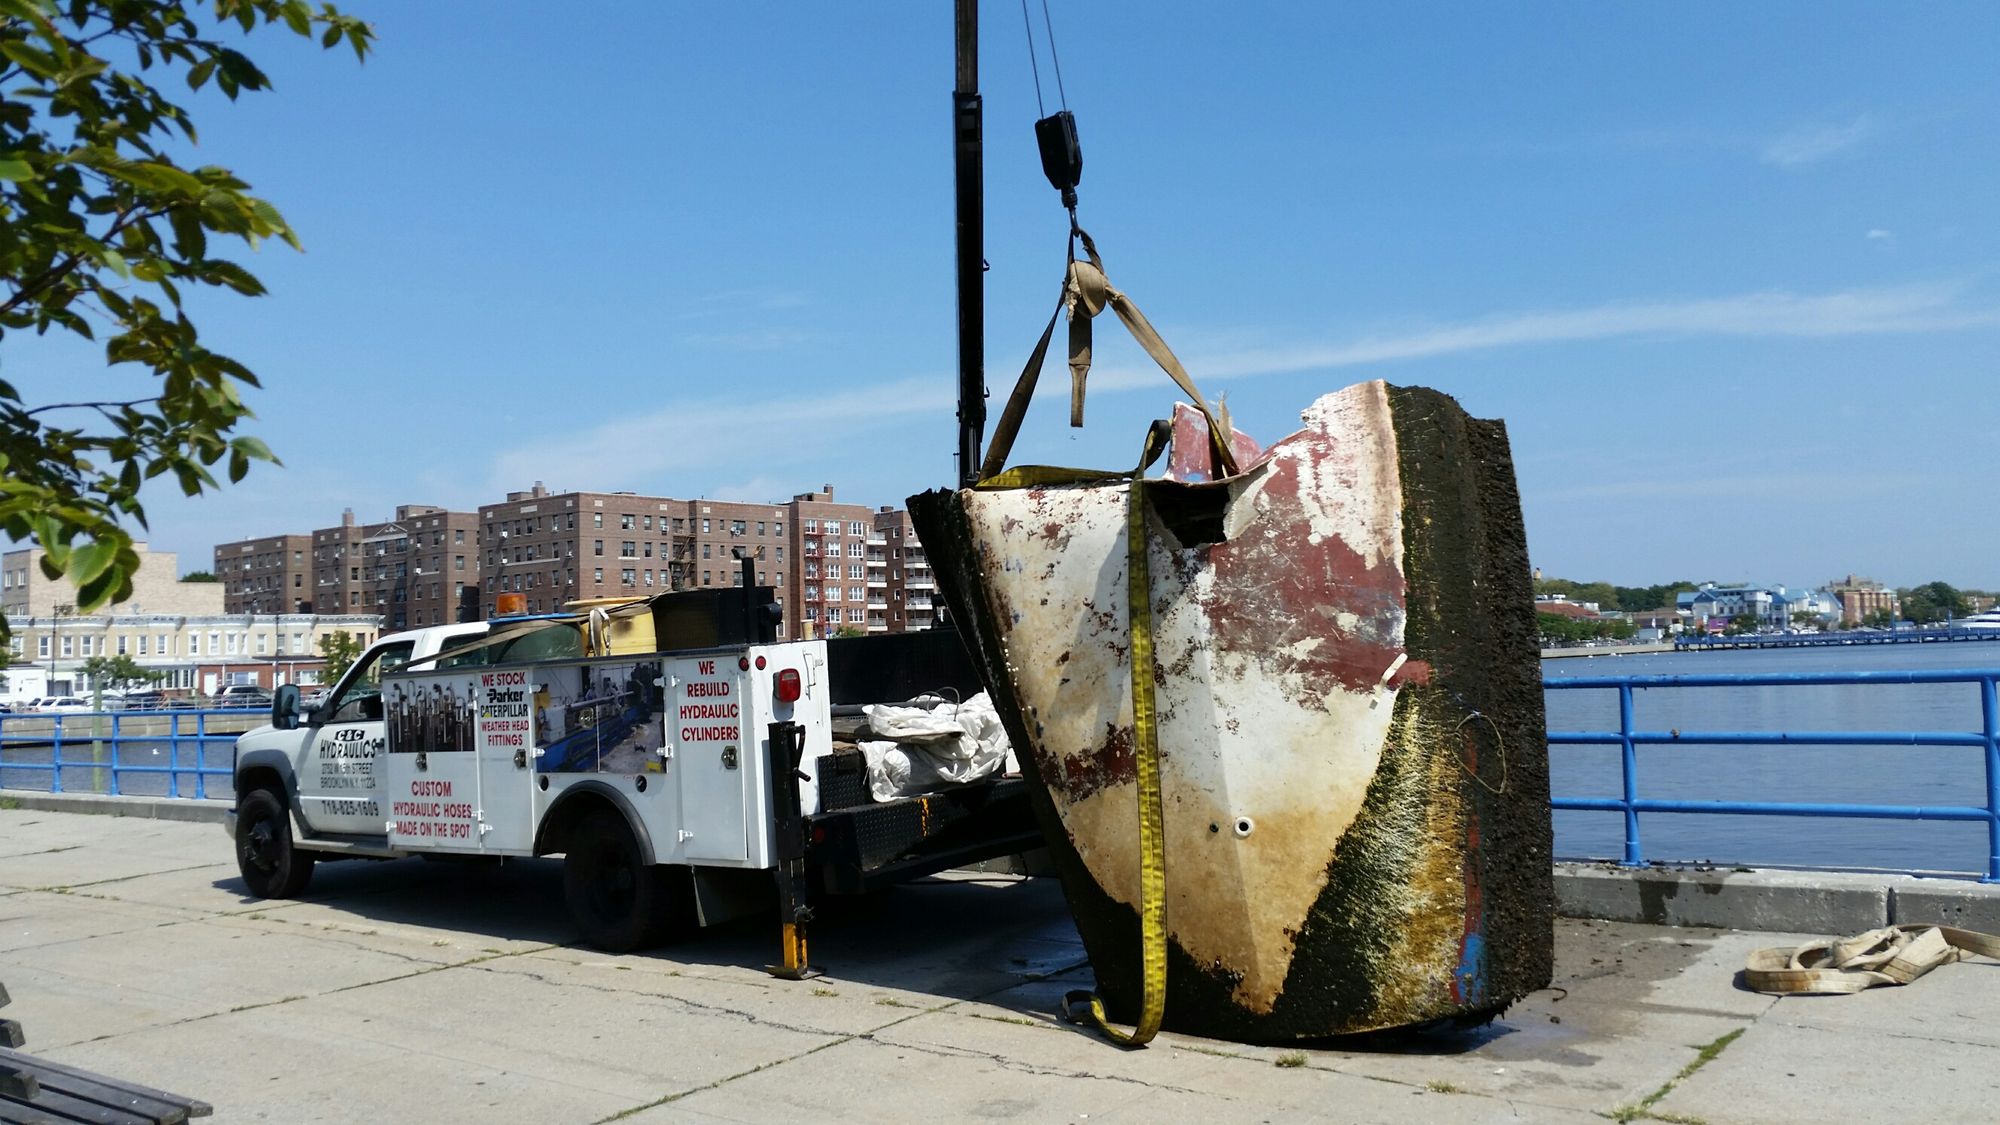 Rotting Overturned Boat In Bay Removed